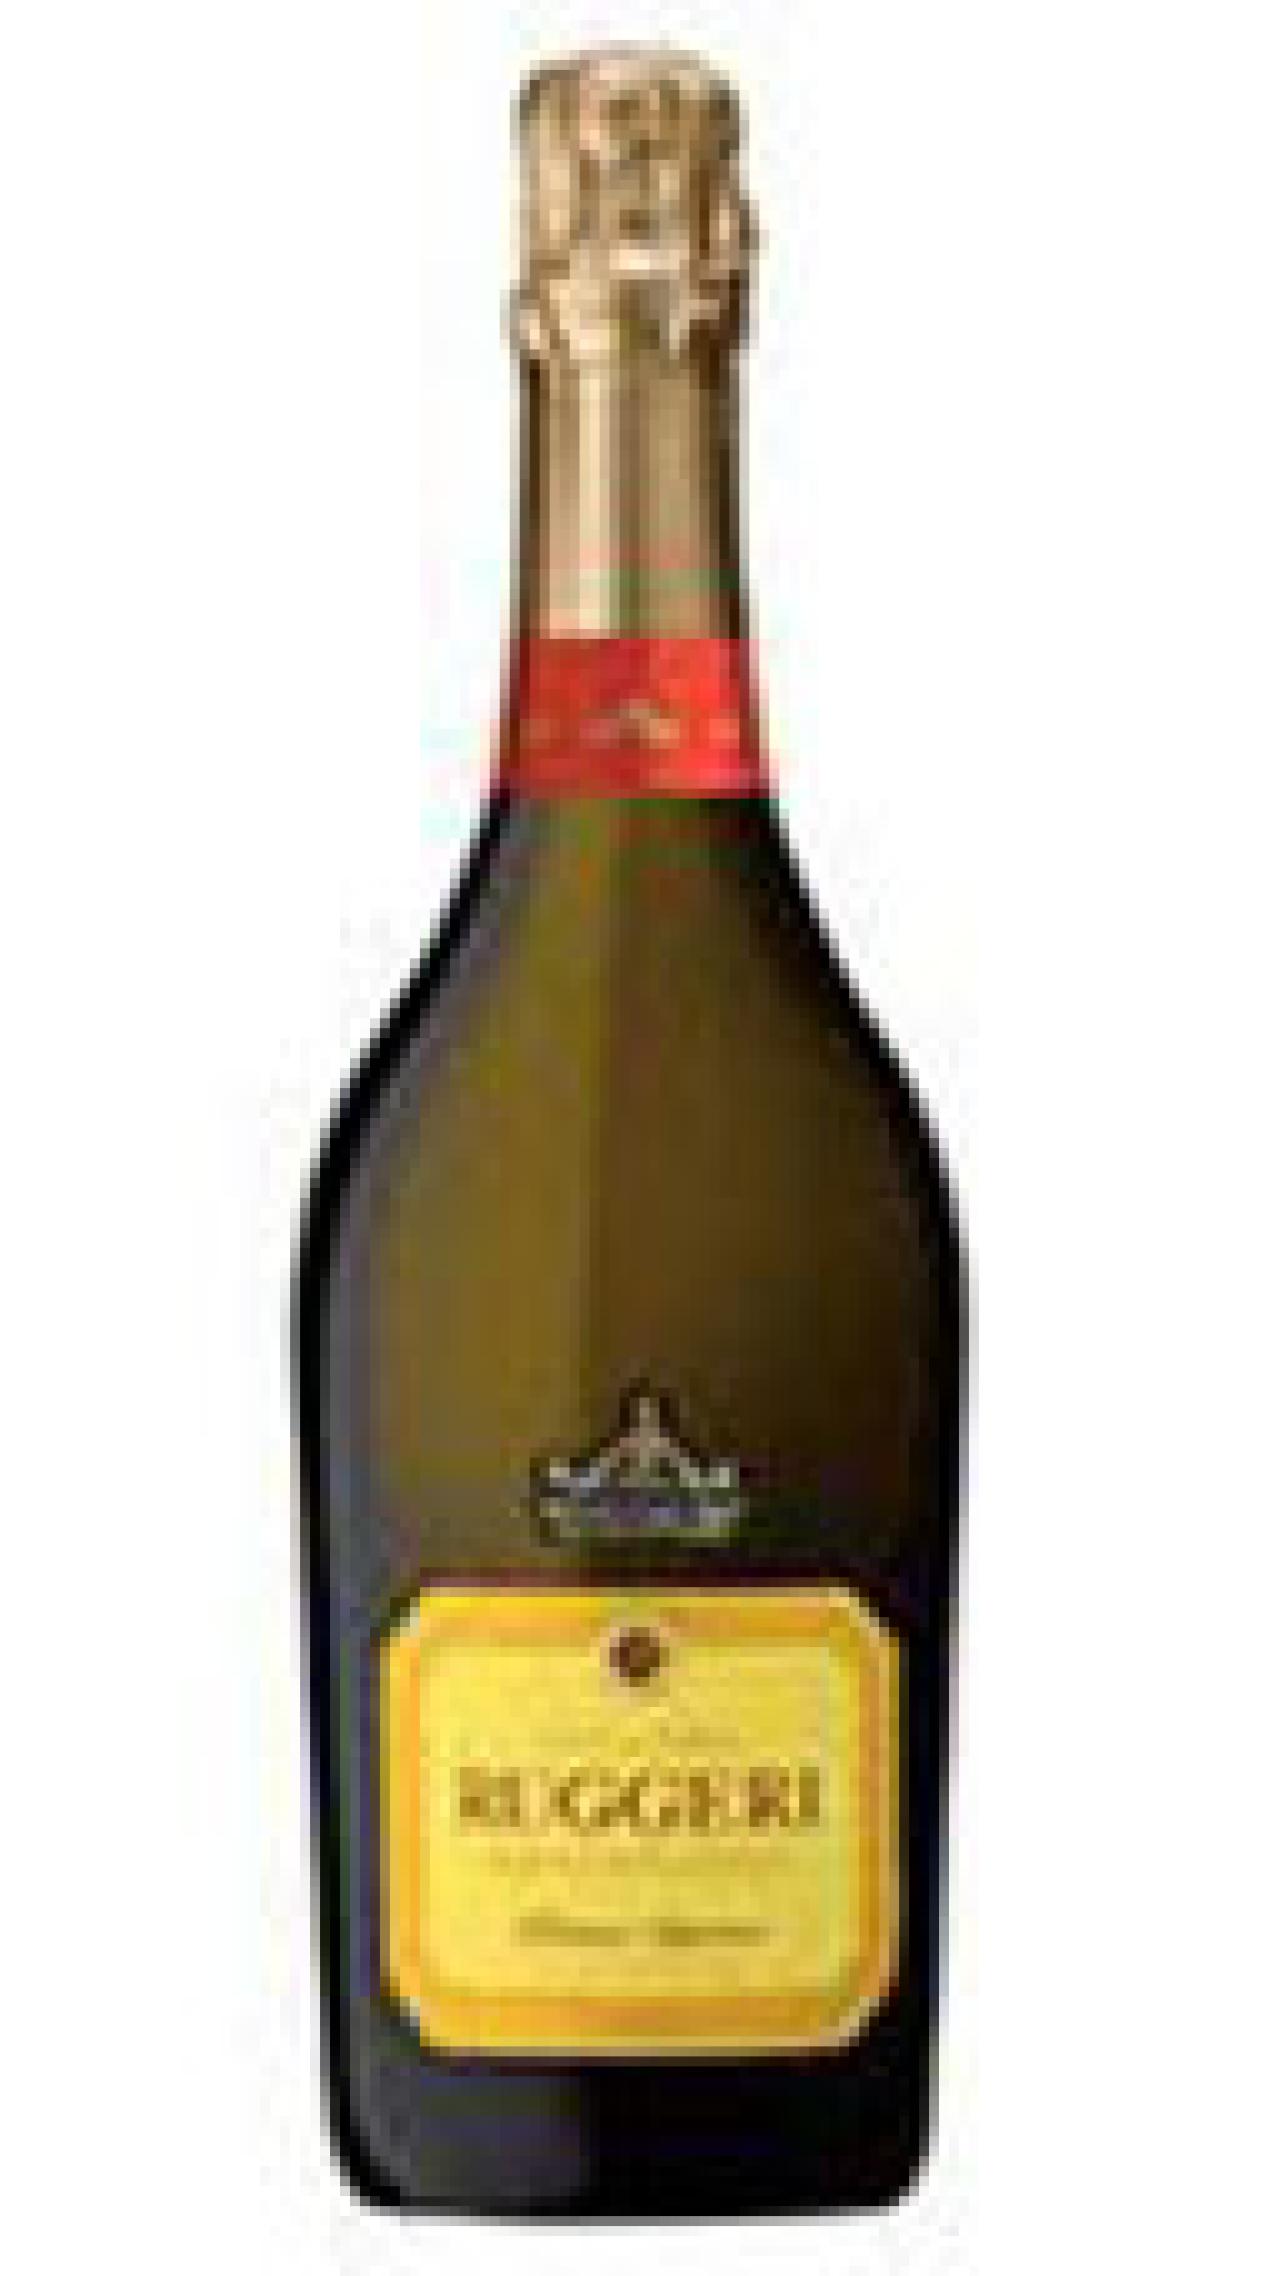 Giall’ Oro Prosecco Extra Dry 